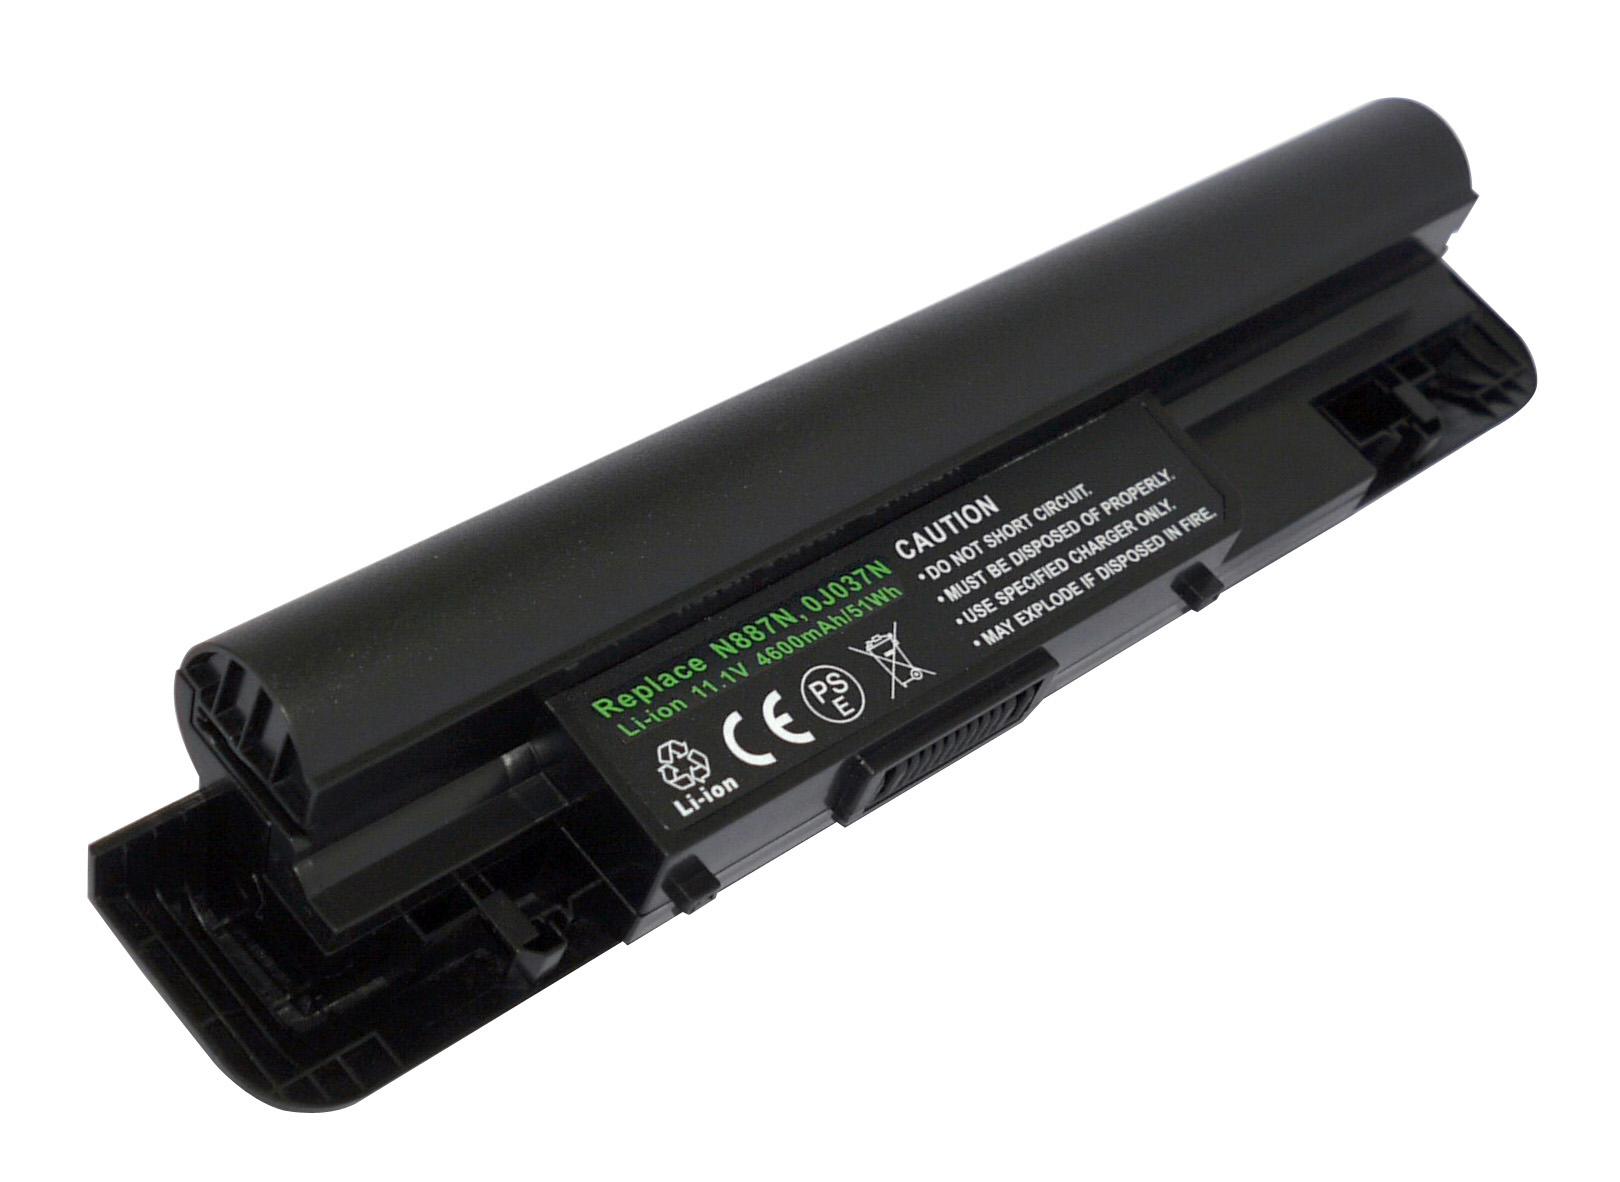 Replacement for Dell Vostro 1220, Vostro 1220n Laptop Battery